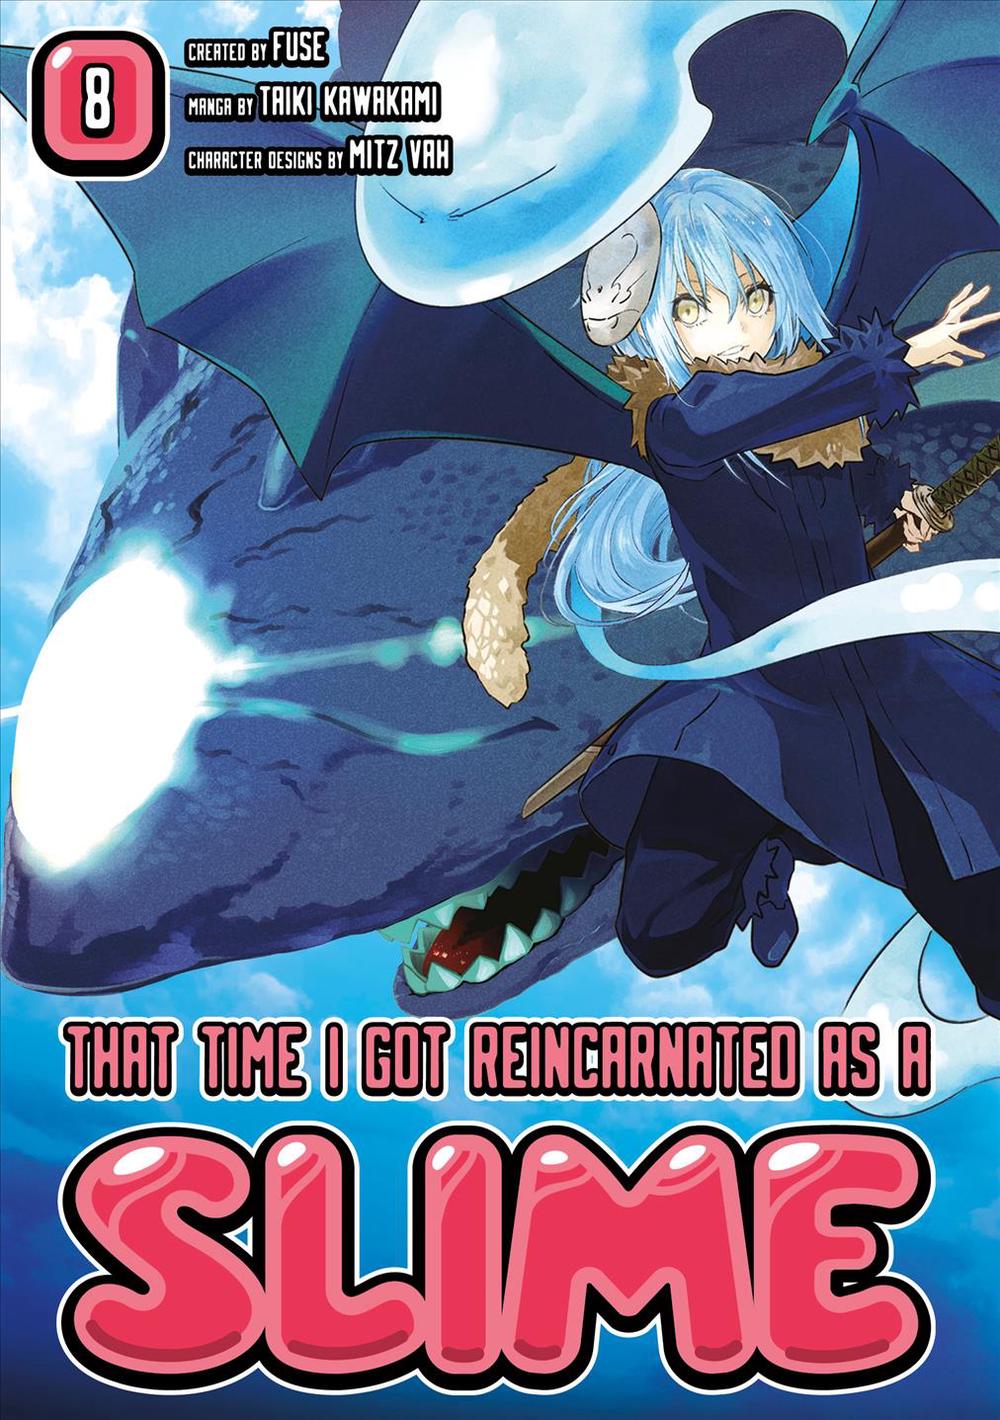 That Time I Got Reincarnated As a Slime 8 by Fuse Paperback  